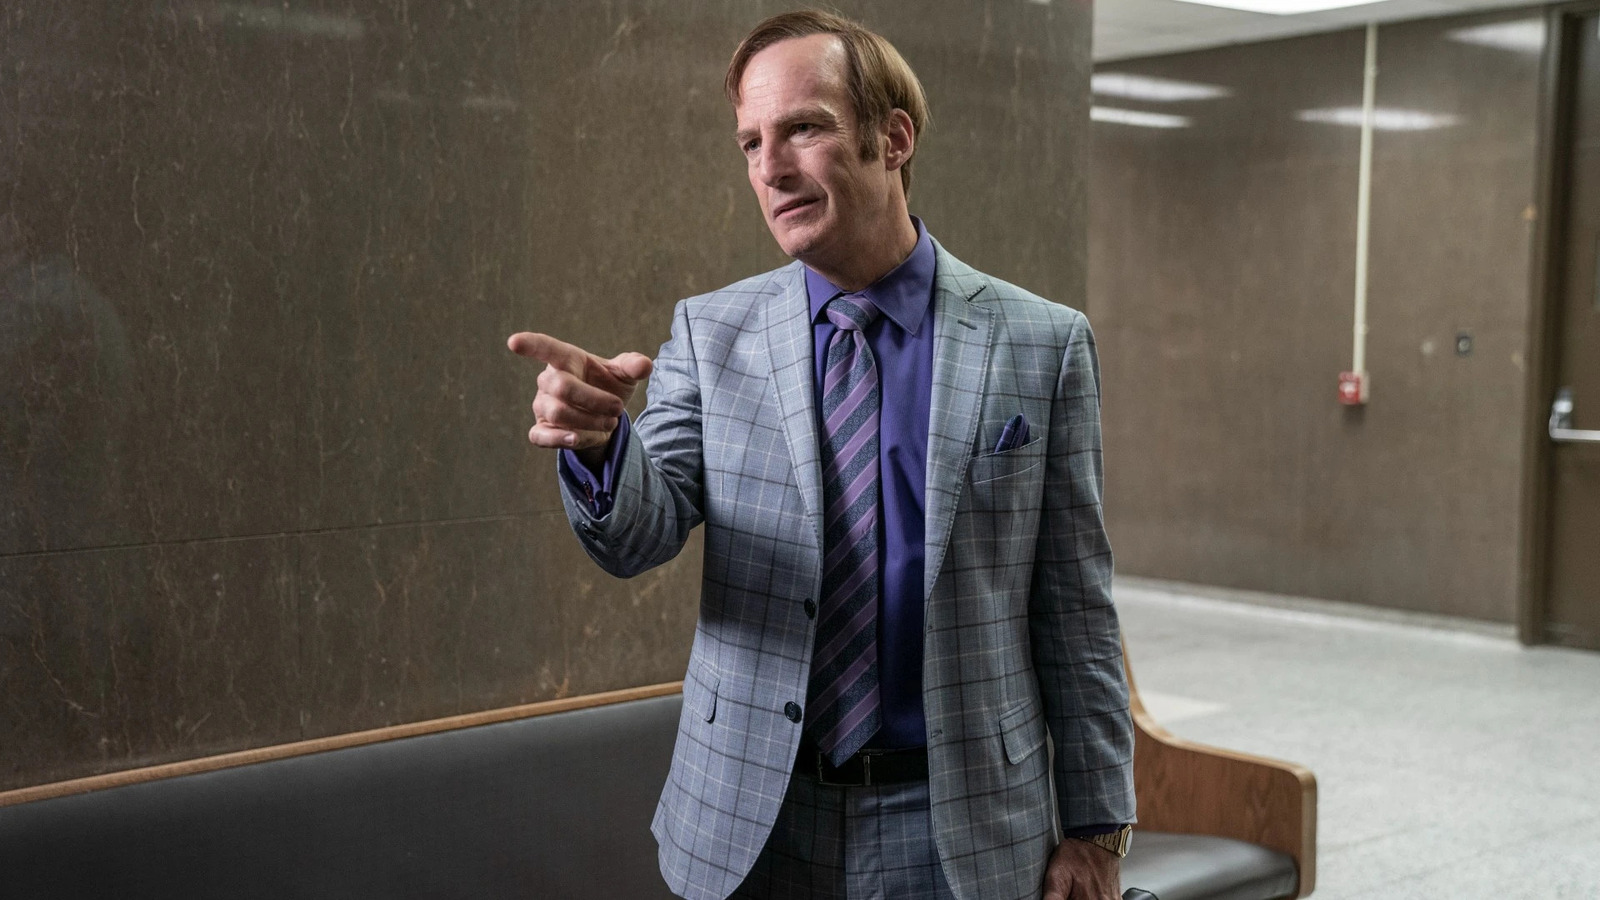 #Tribeca TV Lineup Includes World Premiere Of League Of Their Own Series And Better Call Saul Screening